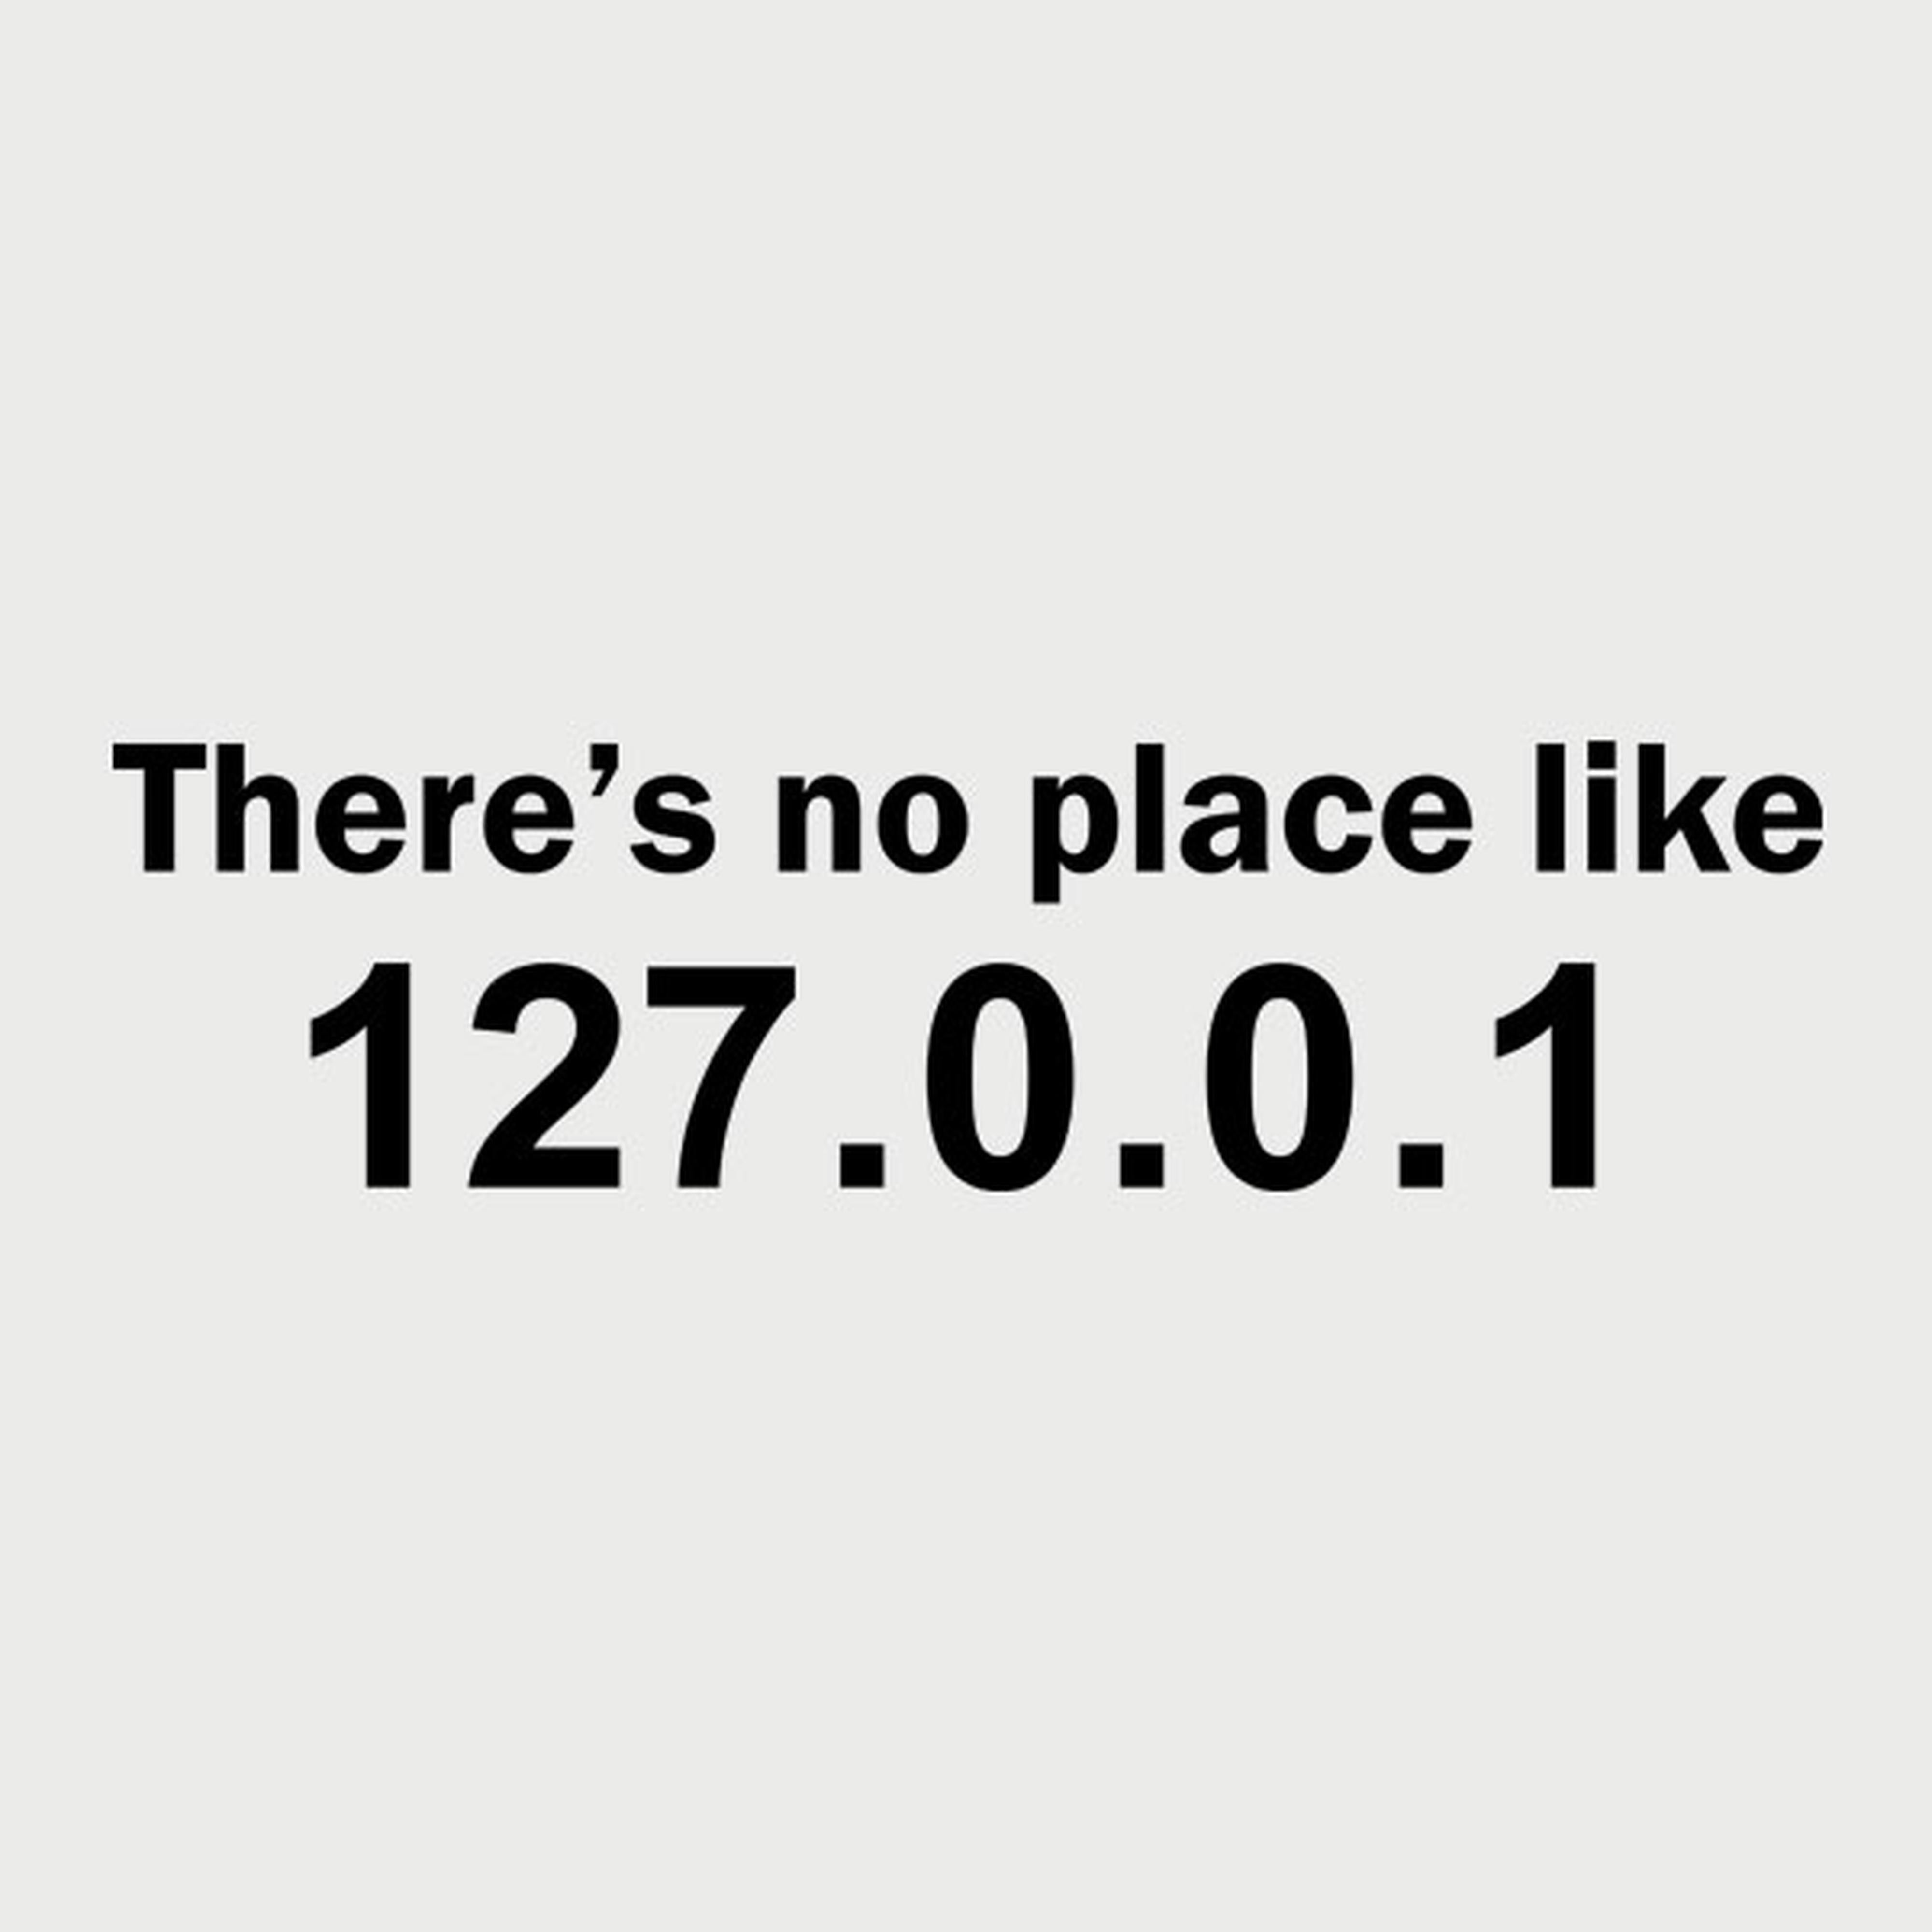 There is no place like 127.0.0.1 - T-shirt